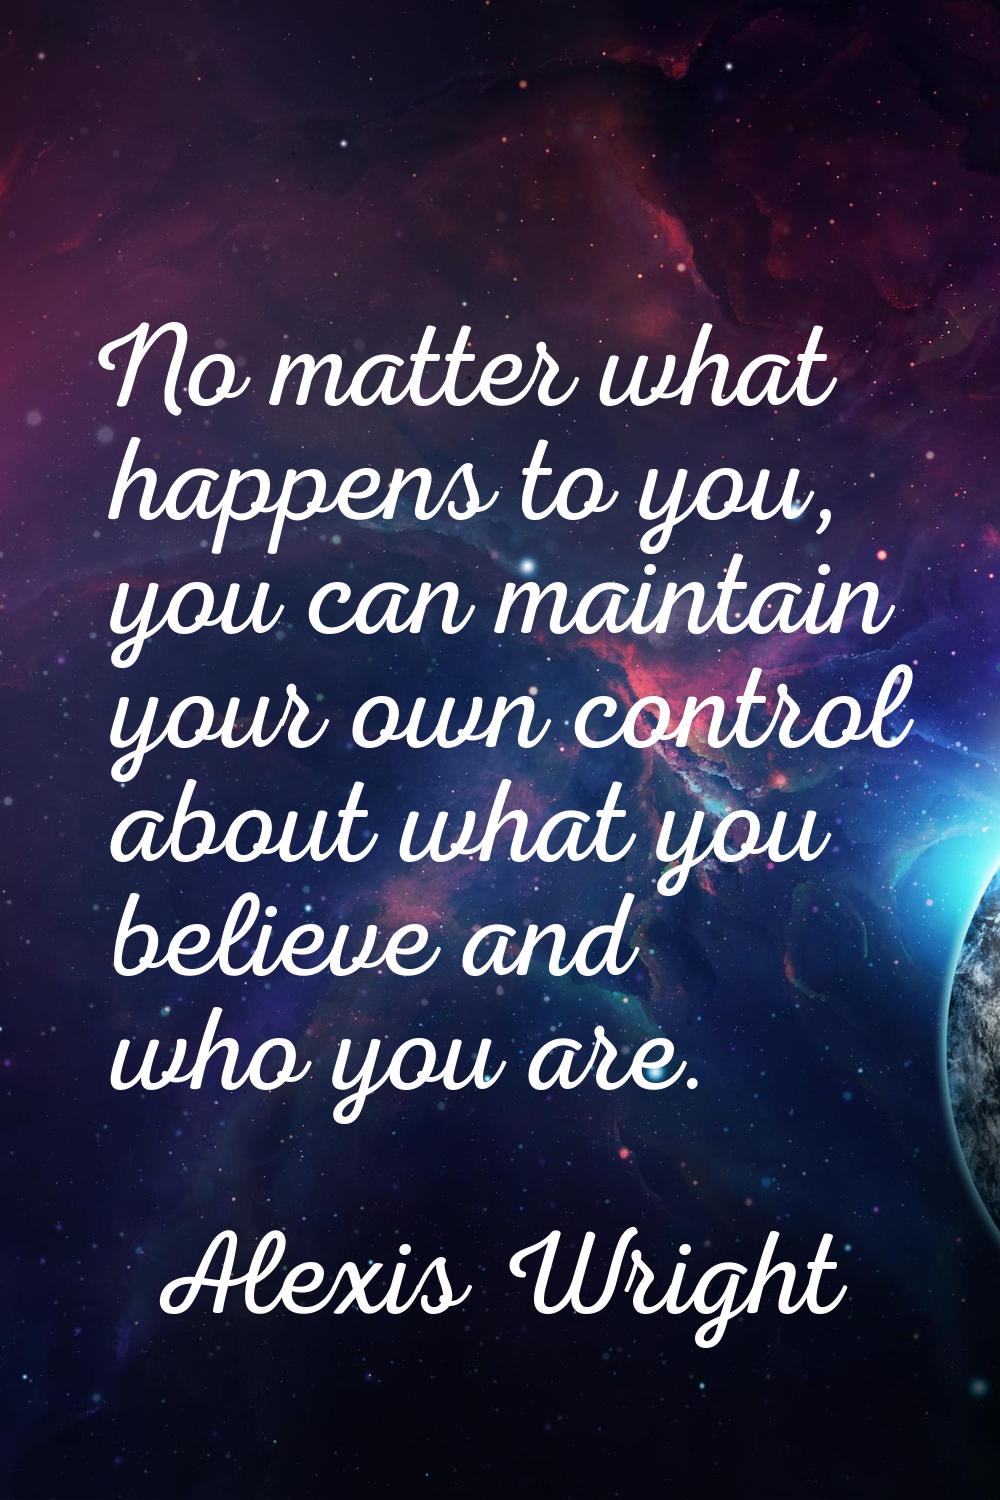 No matter what happens to you, you can maintain your own control about what you believe and who you